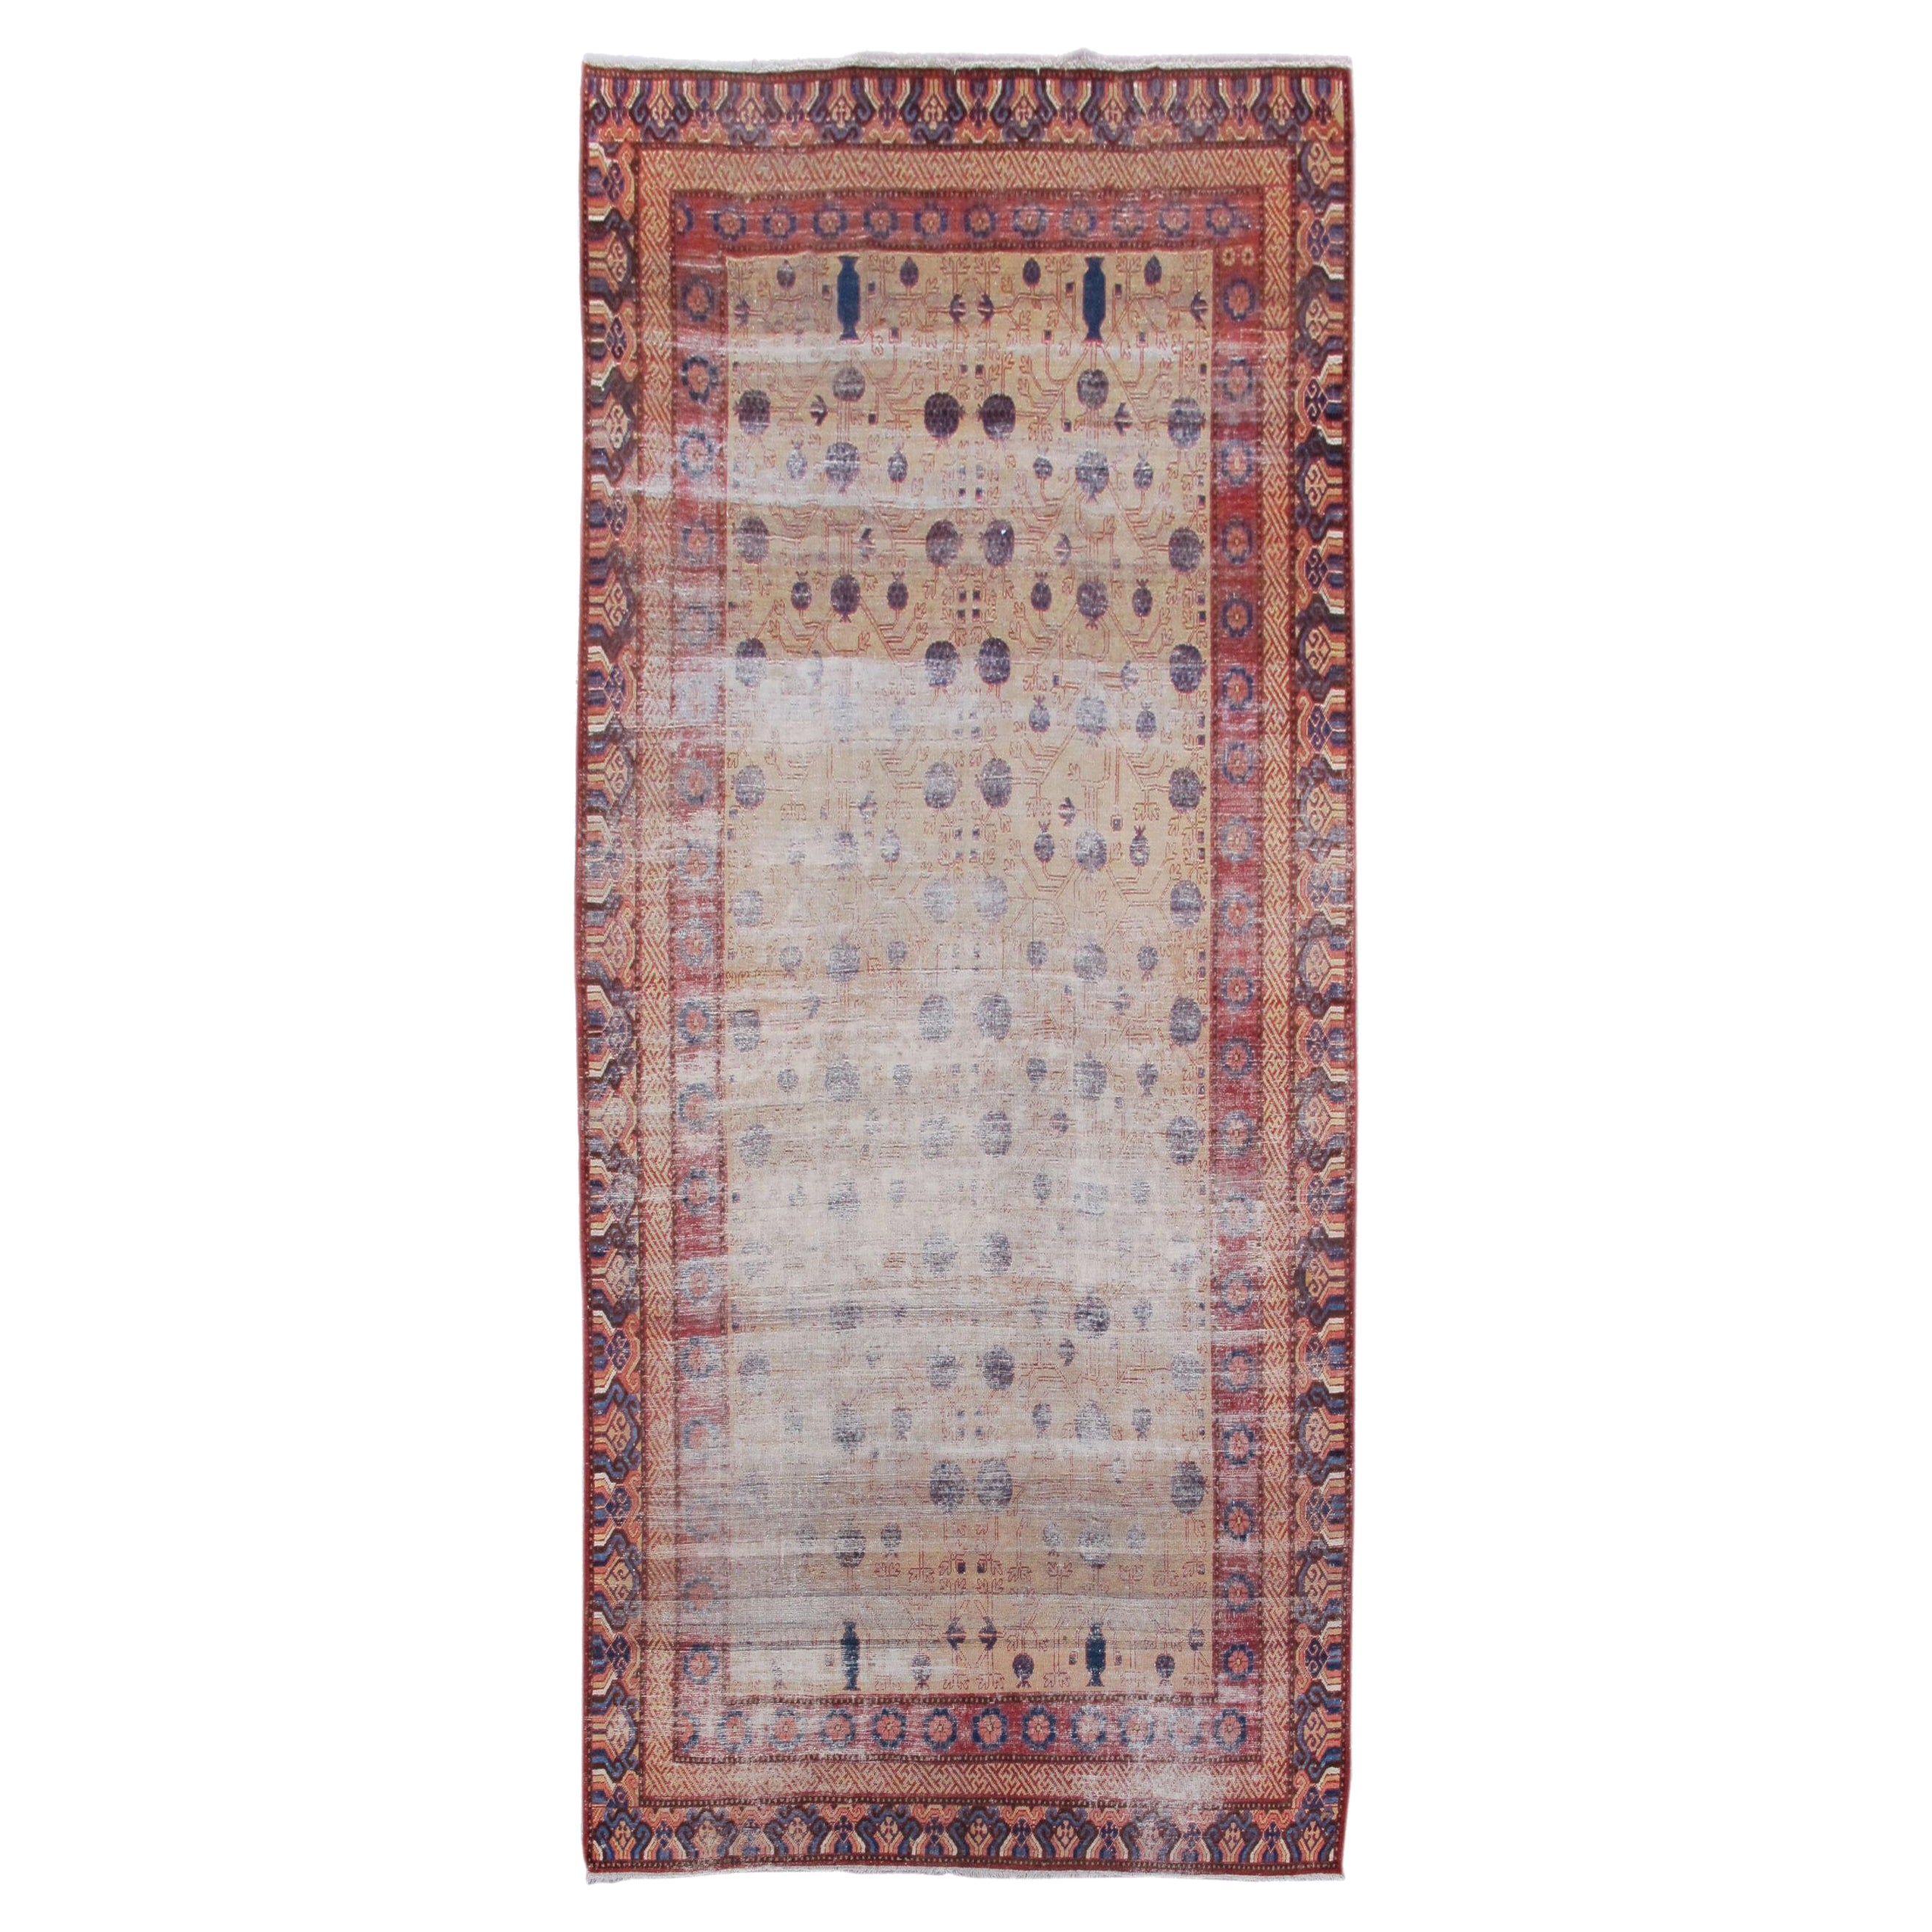 Antique Khotan Rug, Early 19th Century For Sale